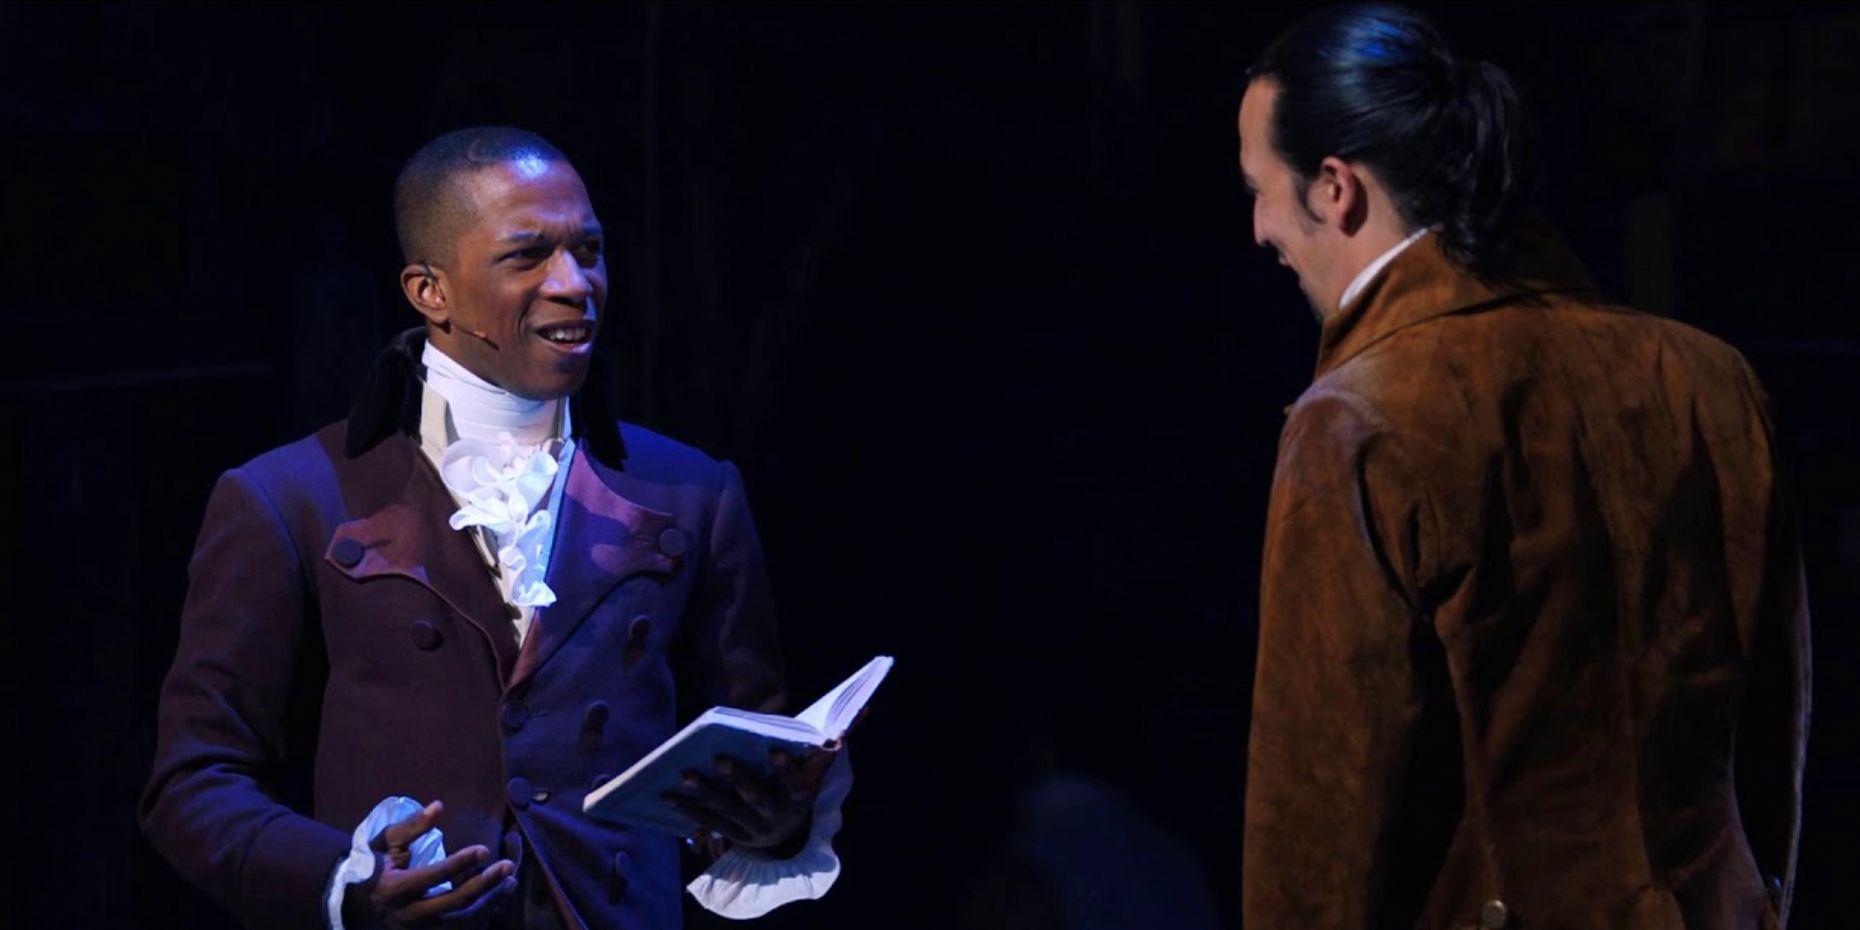 Burr is incredulous at Hamilton in the Hamilton stage show